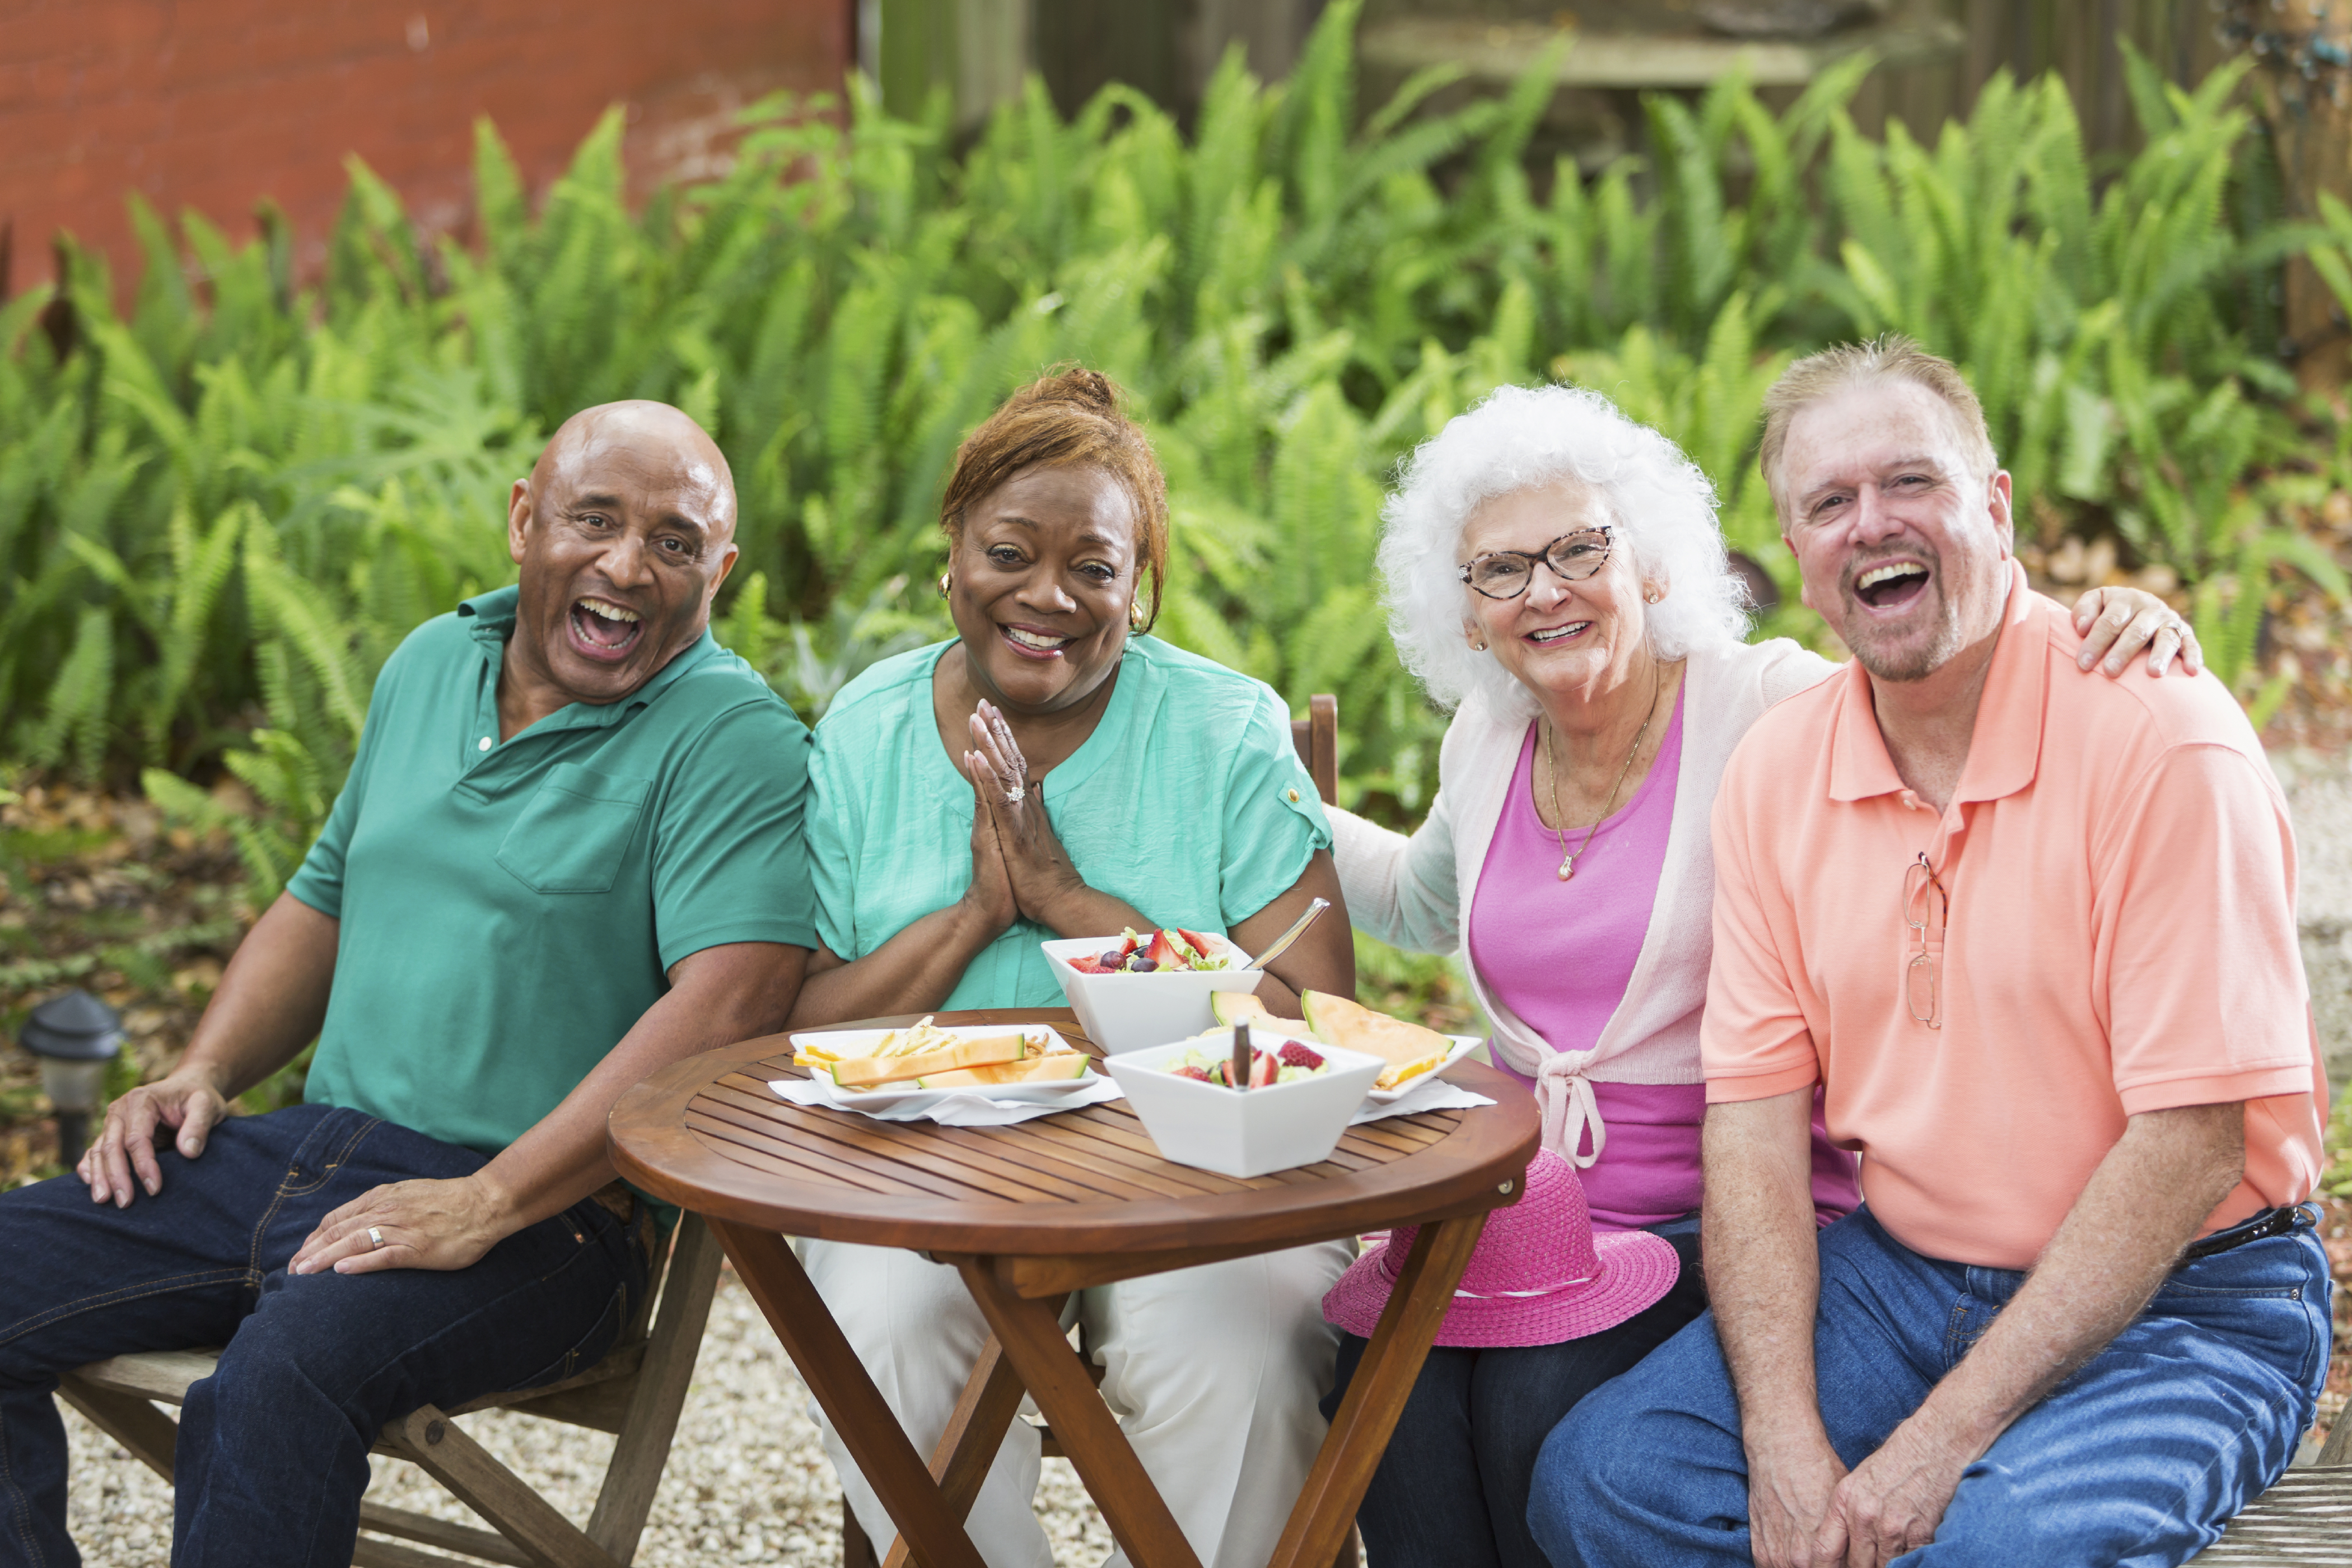 Group of seniors enjoying food and friends in back yard